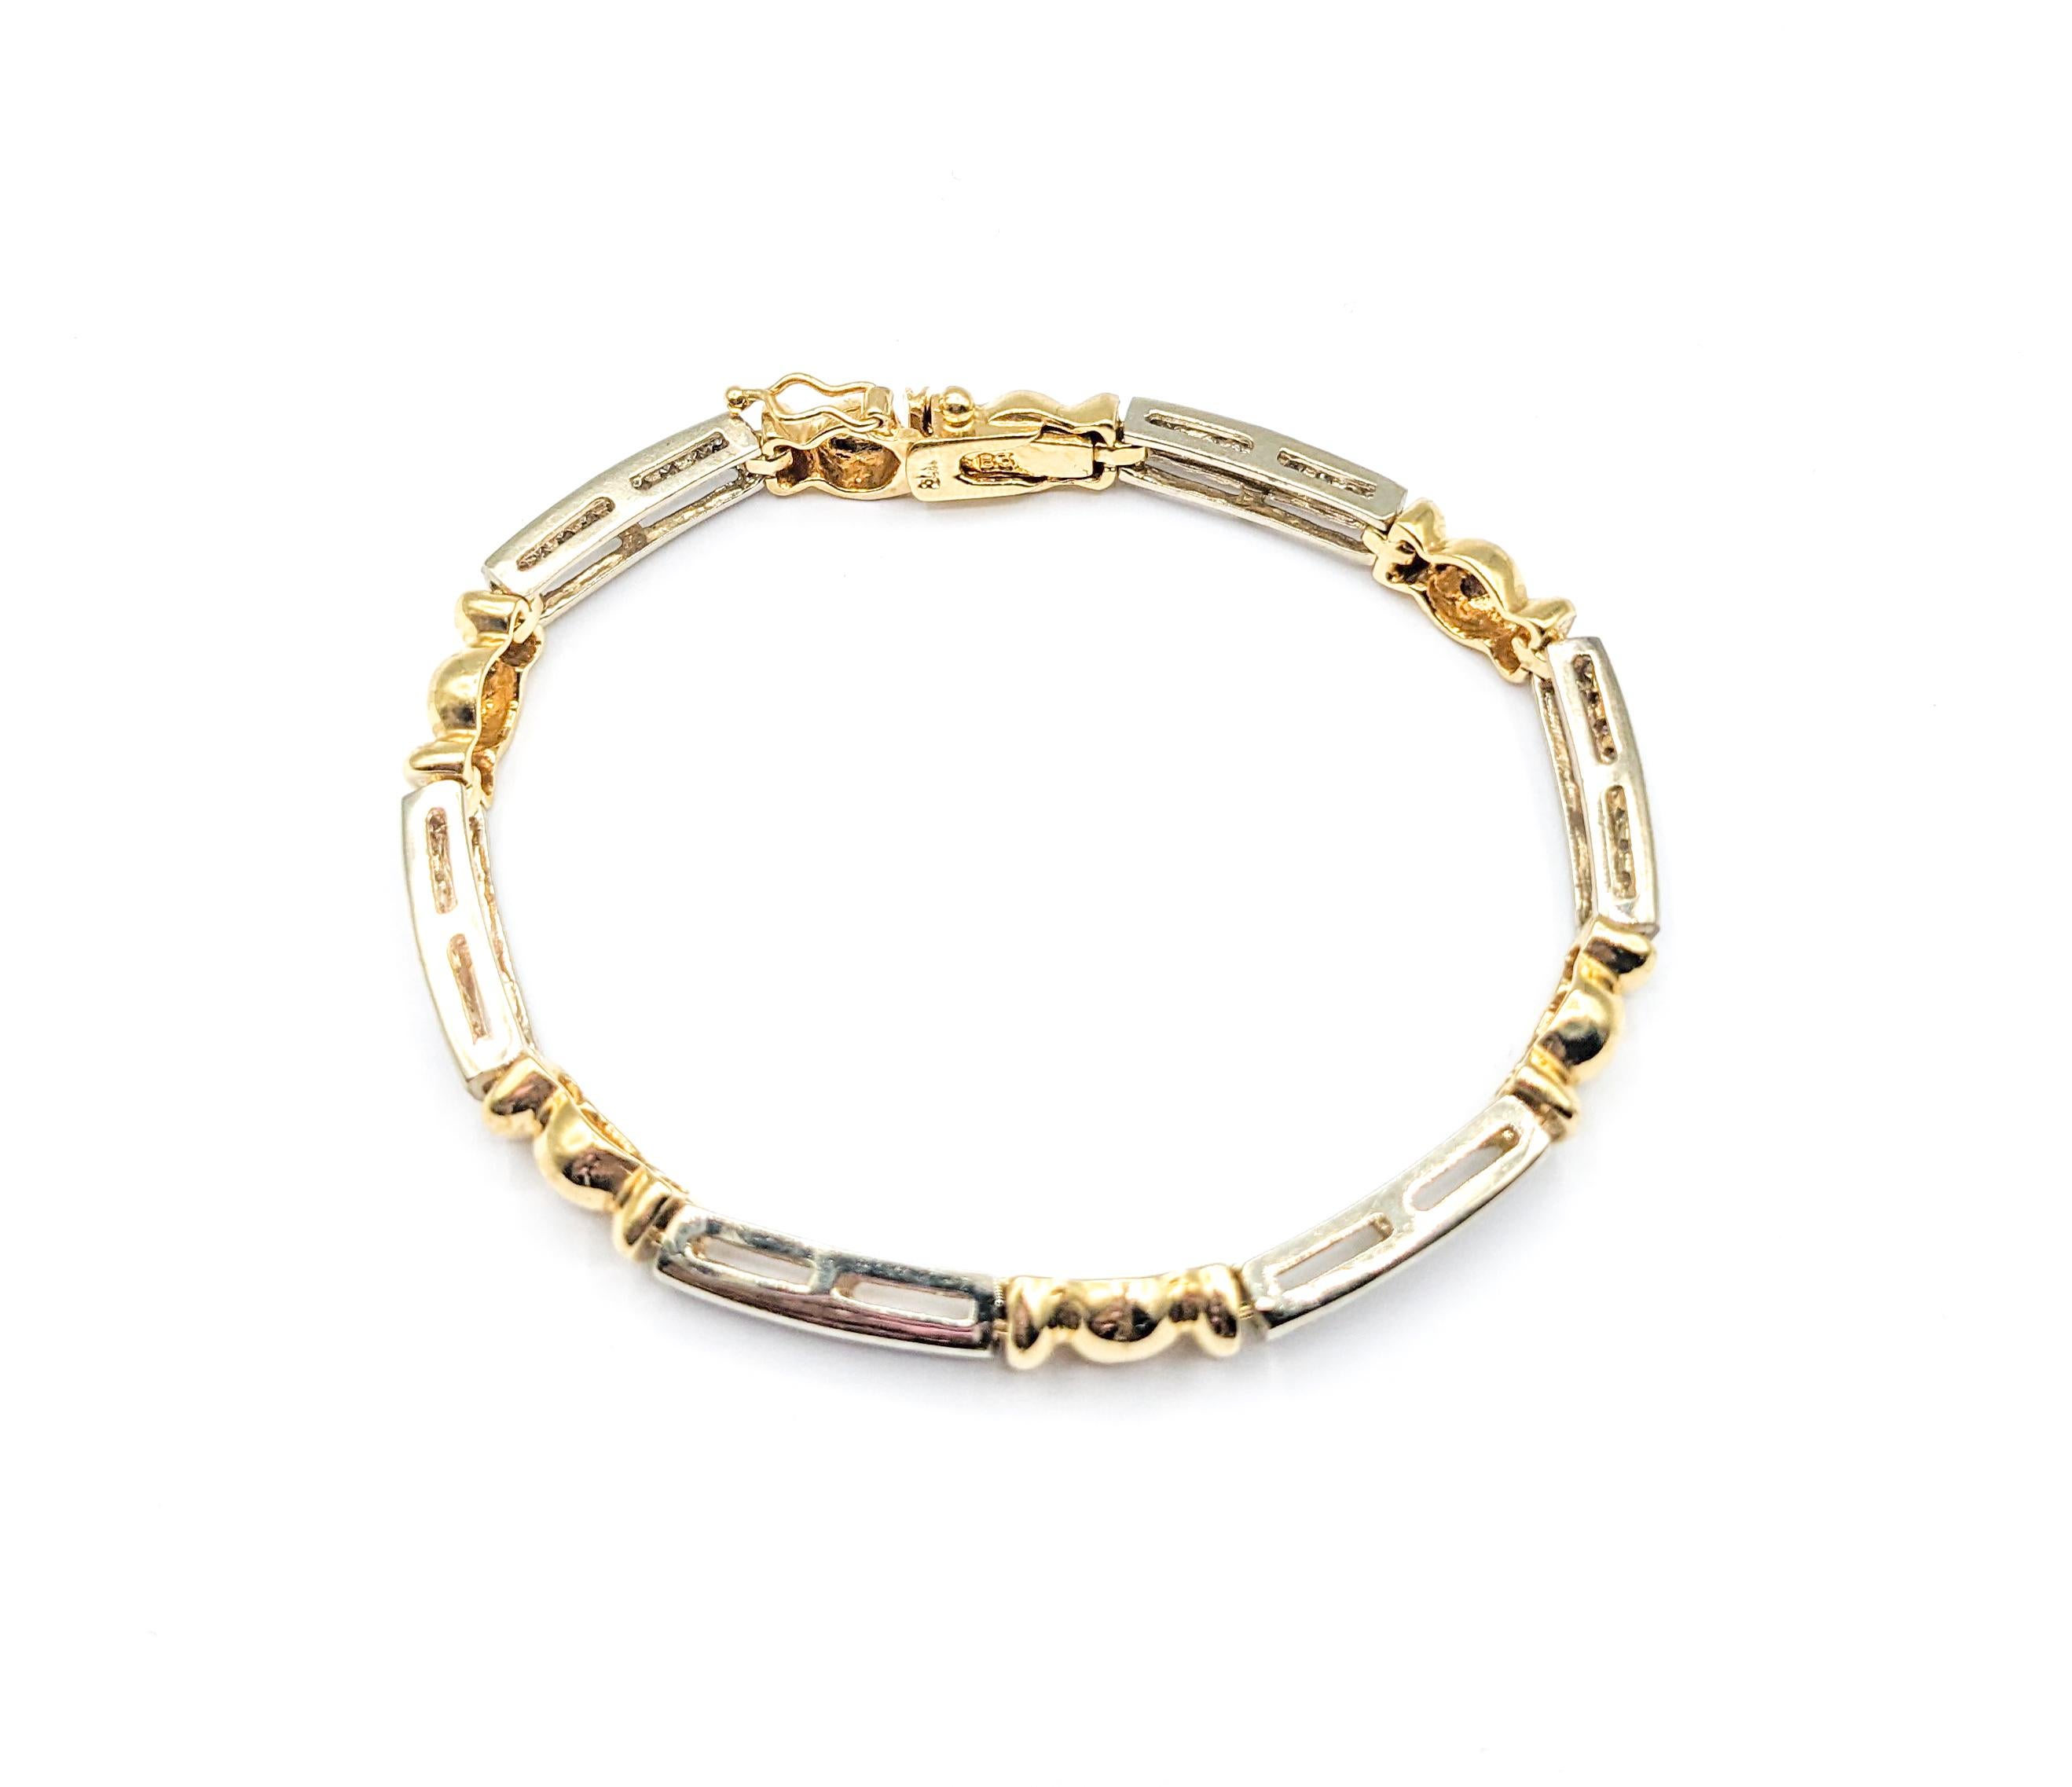 Women's Unique Bar and Ball Design Bracelet In Two-Tone Gold For Sale